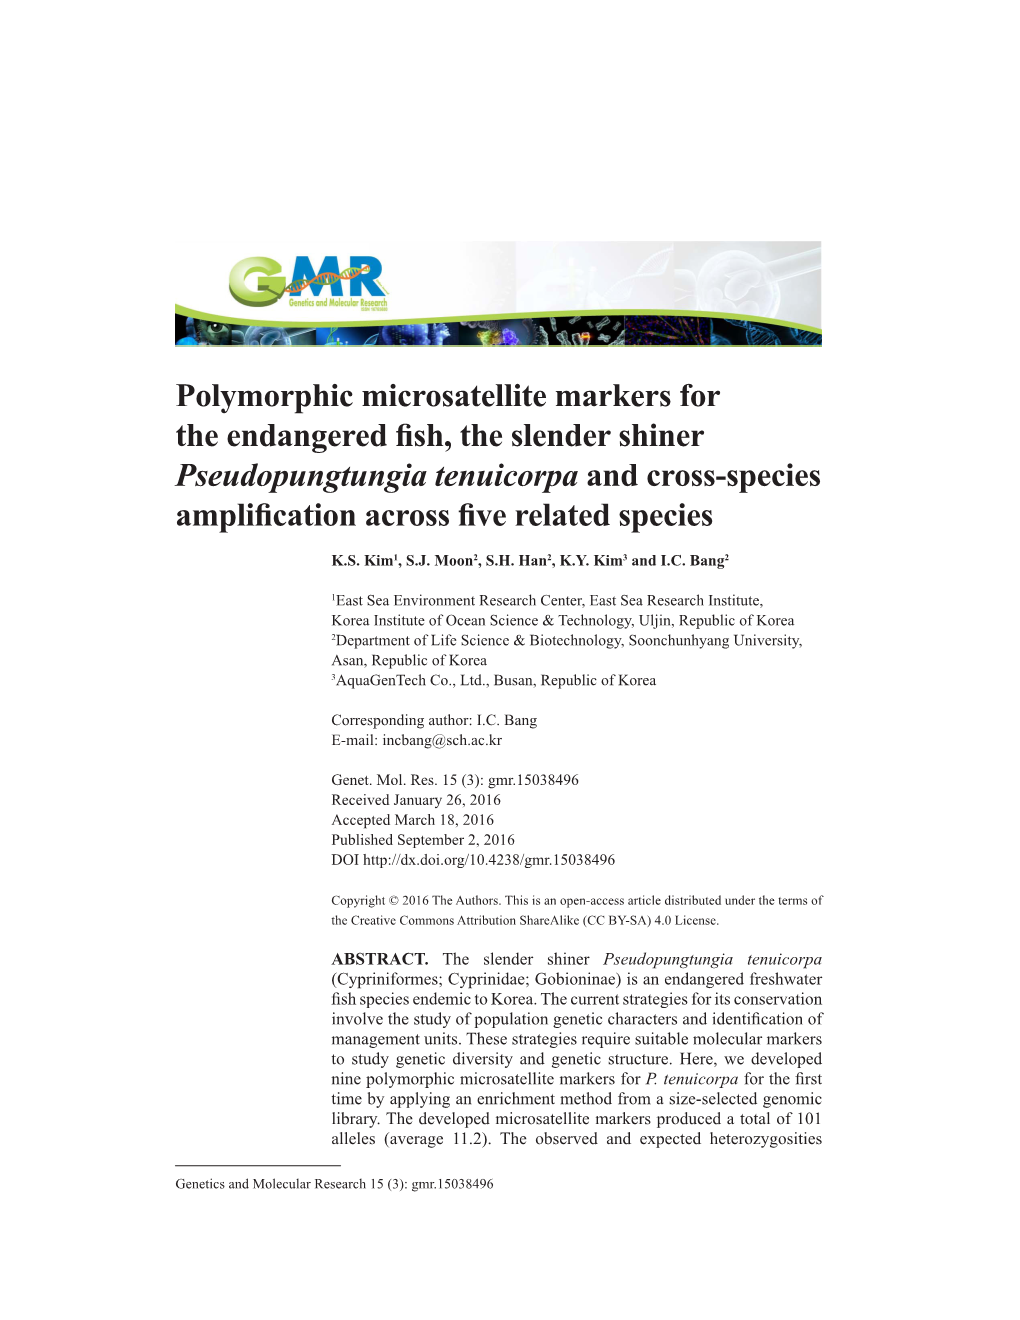 Polymorphic Microsatellite Markers for the Endangered Fish, the Slender Shiner Pseudopungtungia Tenuicorpa and Cross-Species Amplification Across Five Related Species